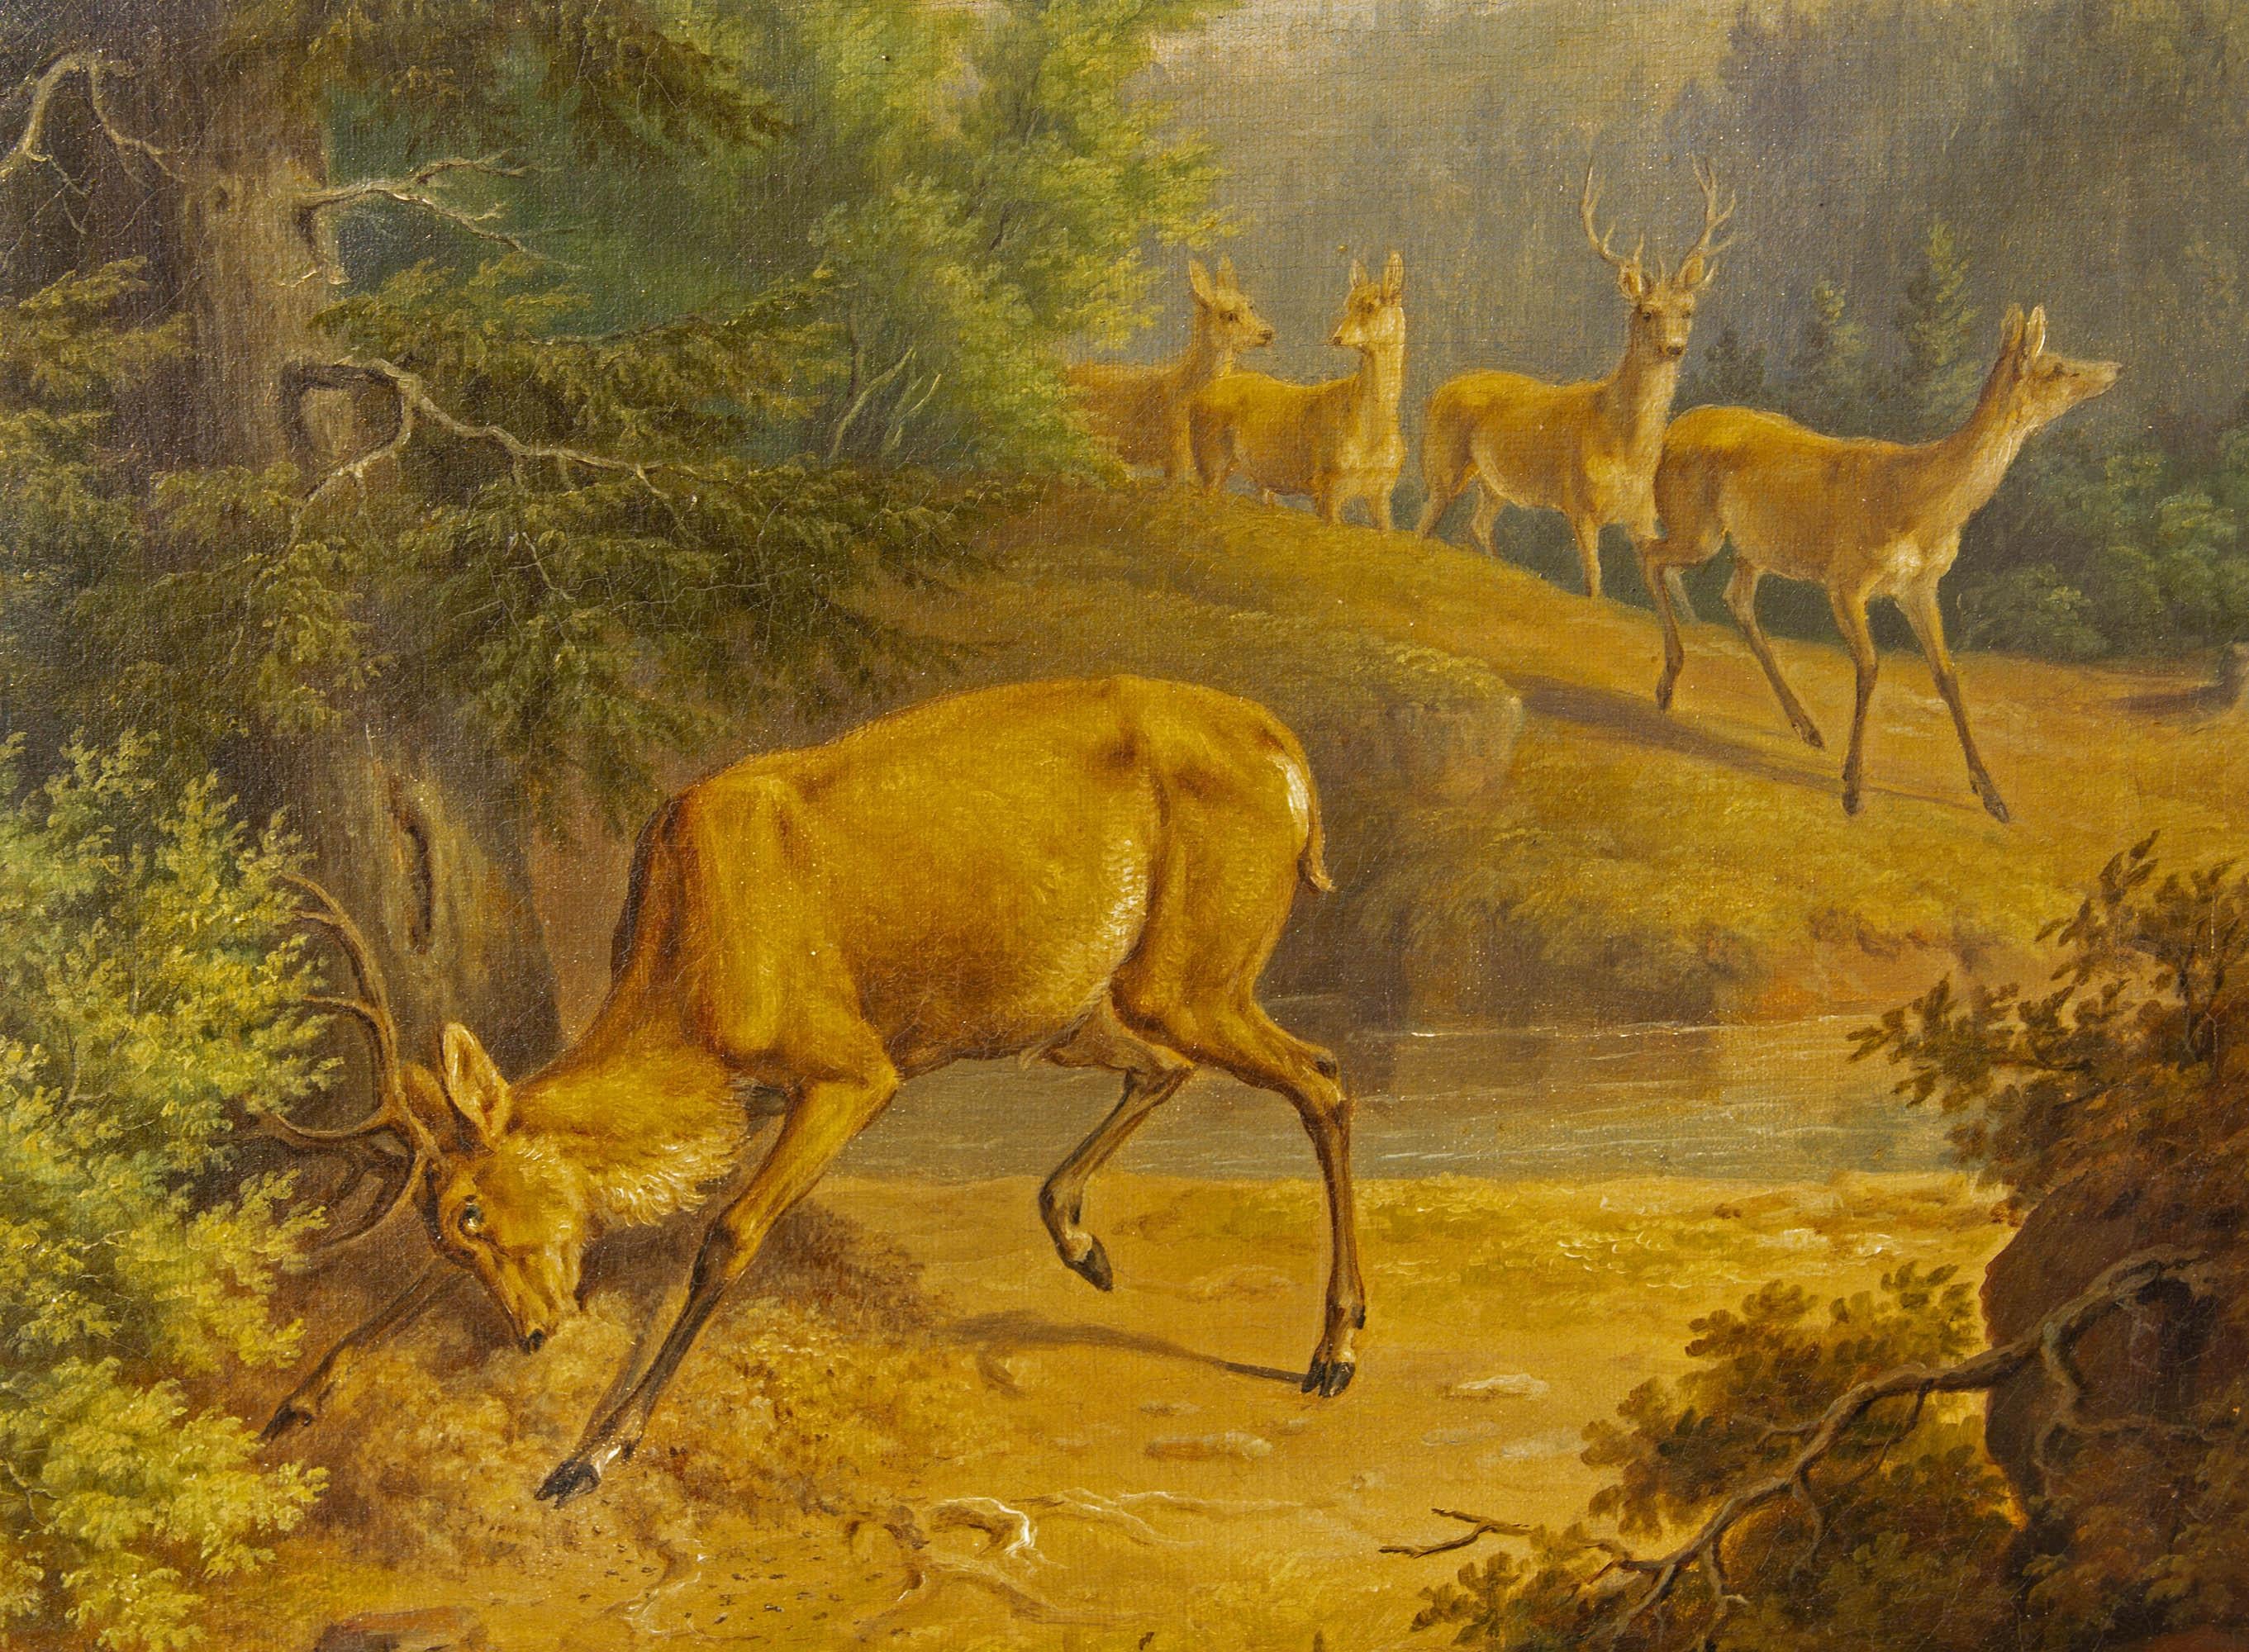 19th century American school painting of a landscape with a stag. Oil on canvas. Unsigned. In the original gilt frame. One of several art works we are selling from a living estate.